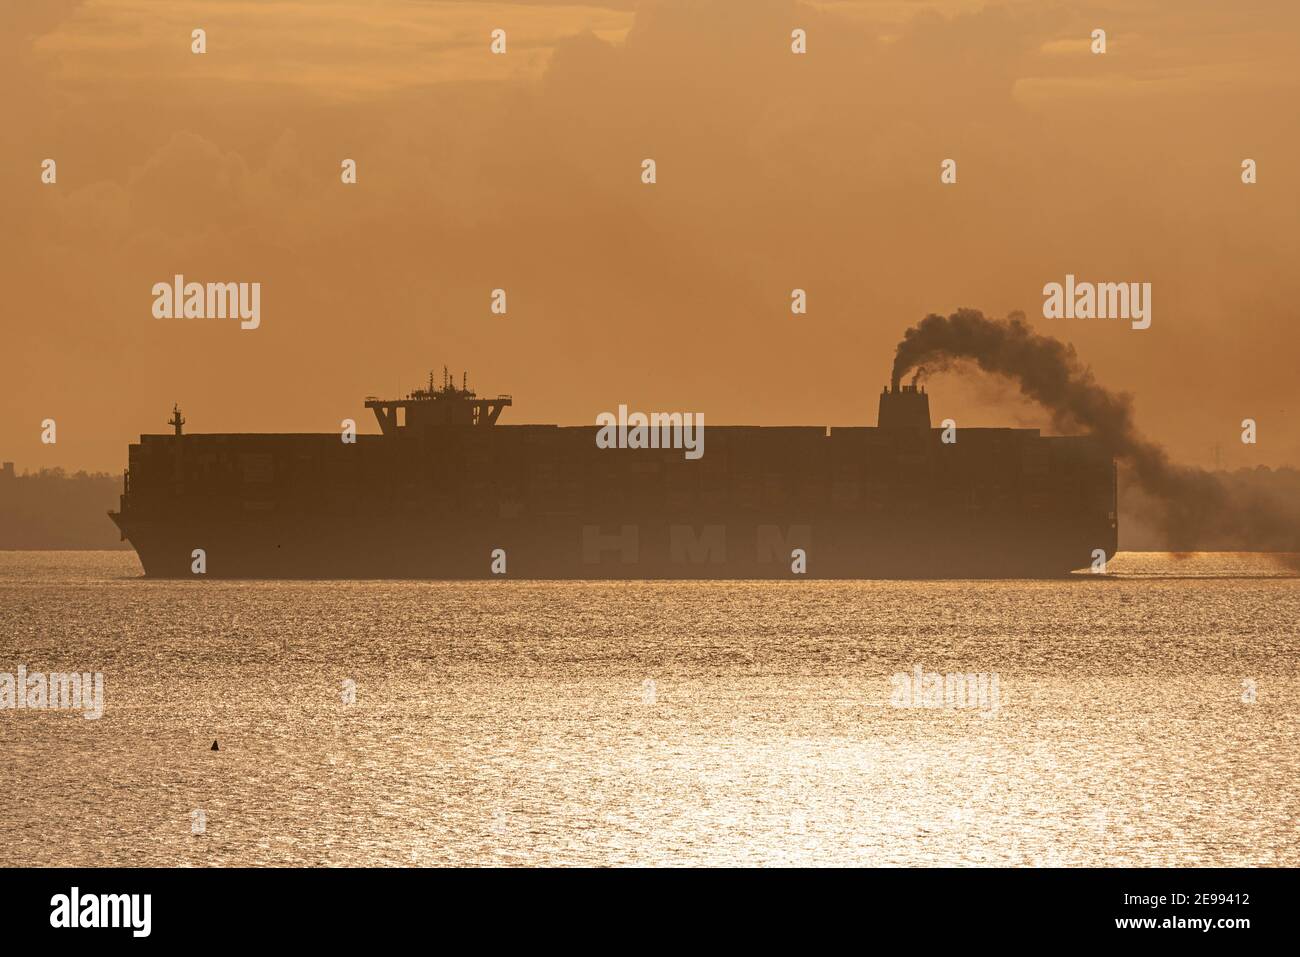 Southend on Sea, Essex, UK. 3rd Feb, 2021. HMM Le Havre is seen passing Southend on Sea on the Thames Estuary late afternoon trailing smoke after leaving DP World London Gateway port. The Algeciras class container ship is one of the largest ever built, entering service in August 2020, able to carry nearly 24000 containers, and serves the Far East Europe 3 loop route. The UK is applying to join the Comprehensive and Progressive Agreement for Trans-Pacific Partnership - or CPTPP – which includes Far Eastern countries served by giant ships such as this Stock Photo